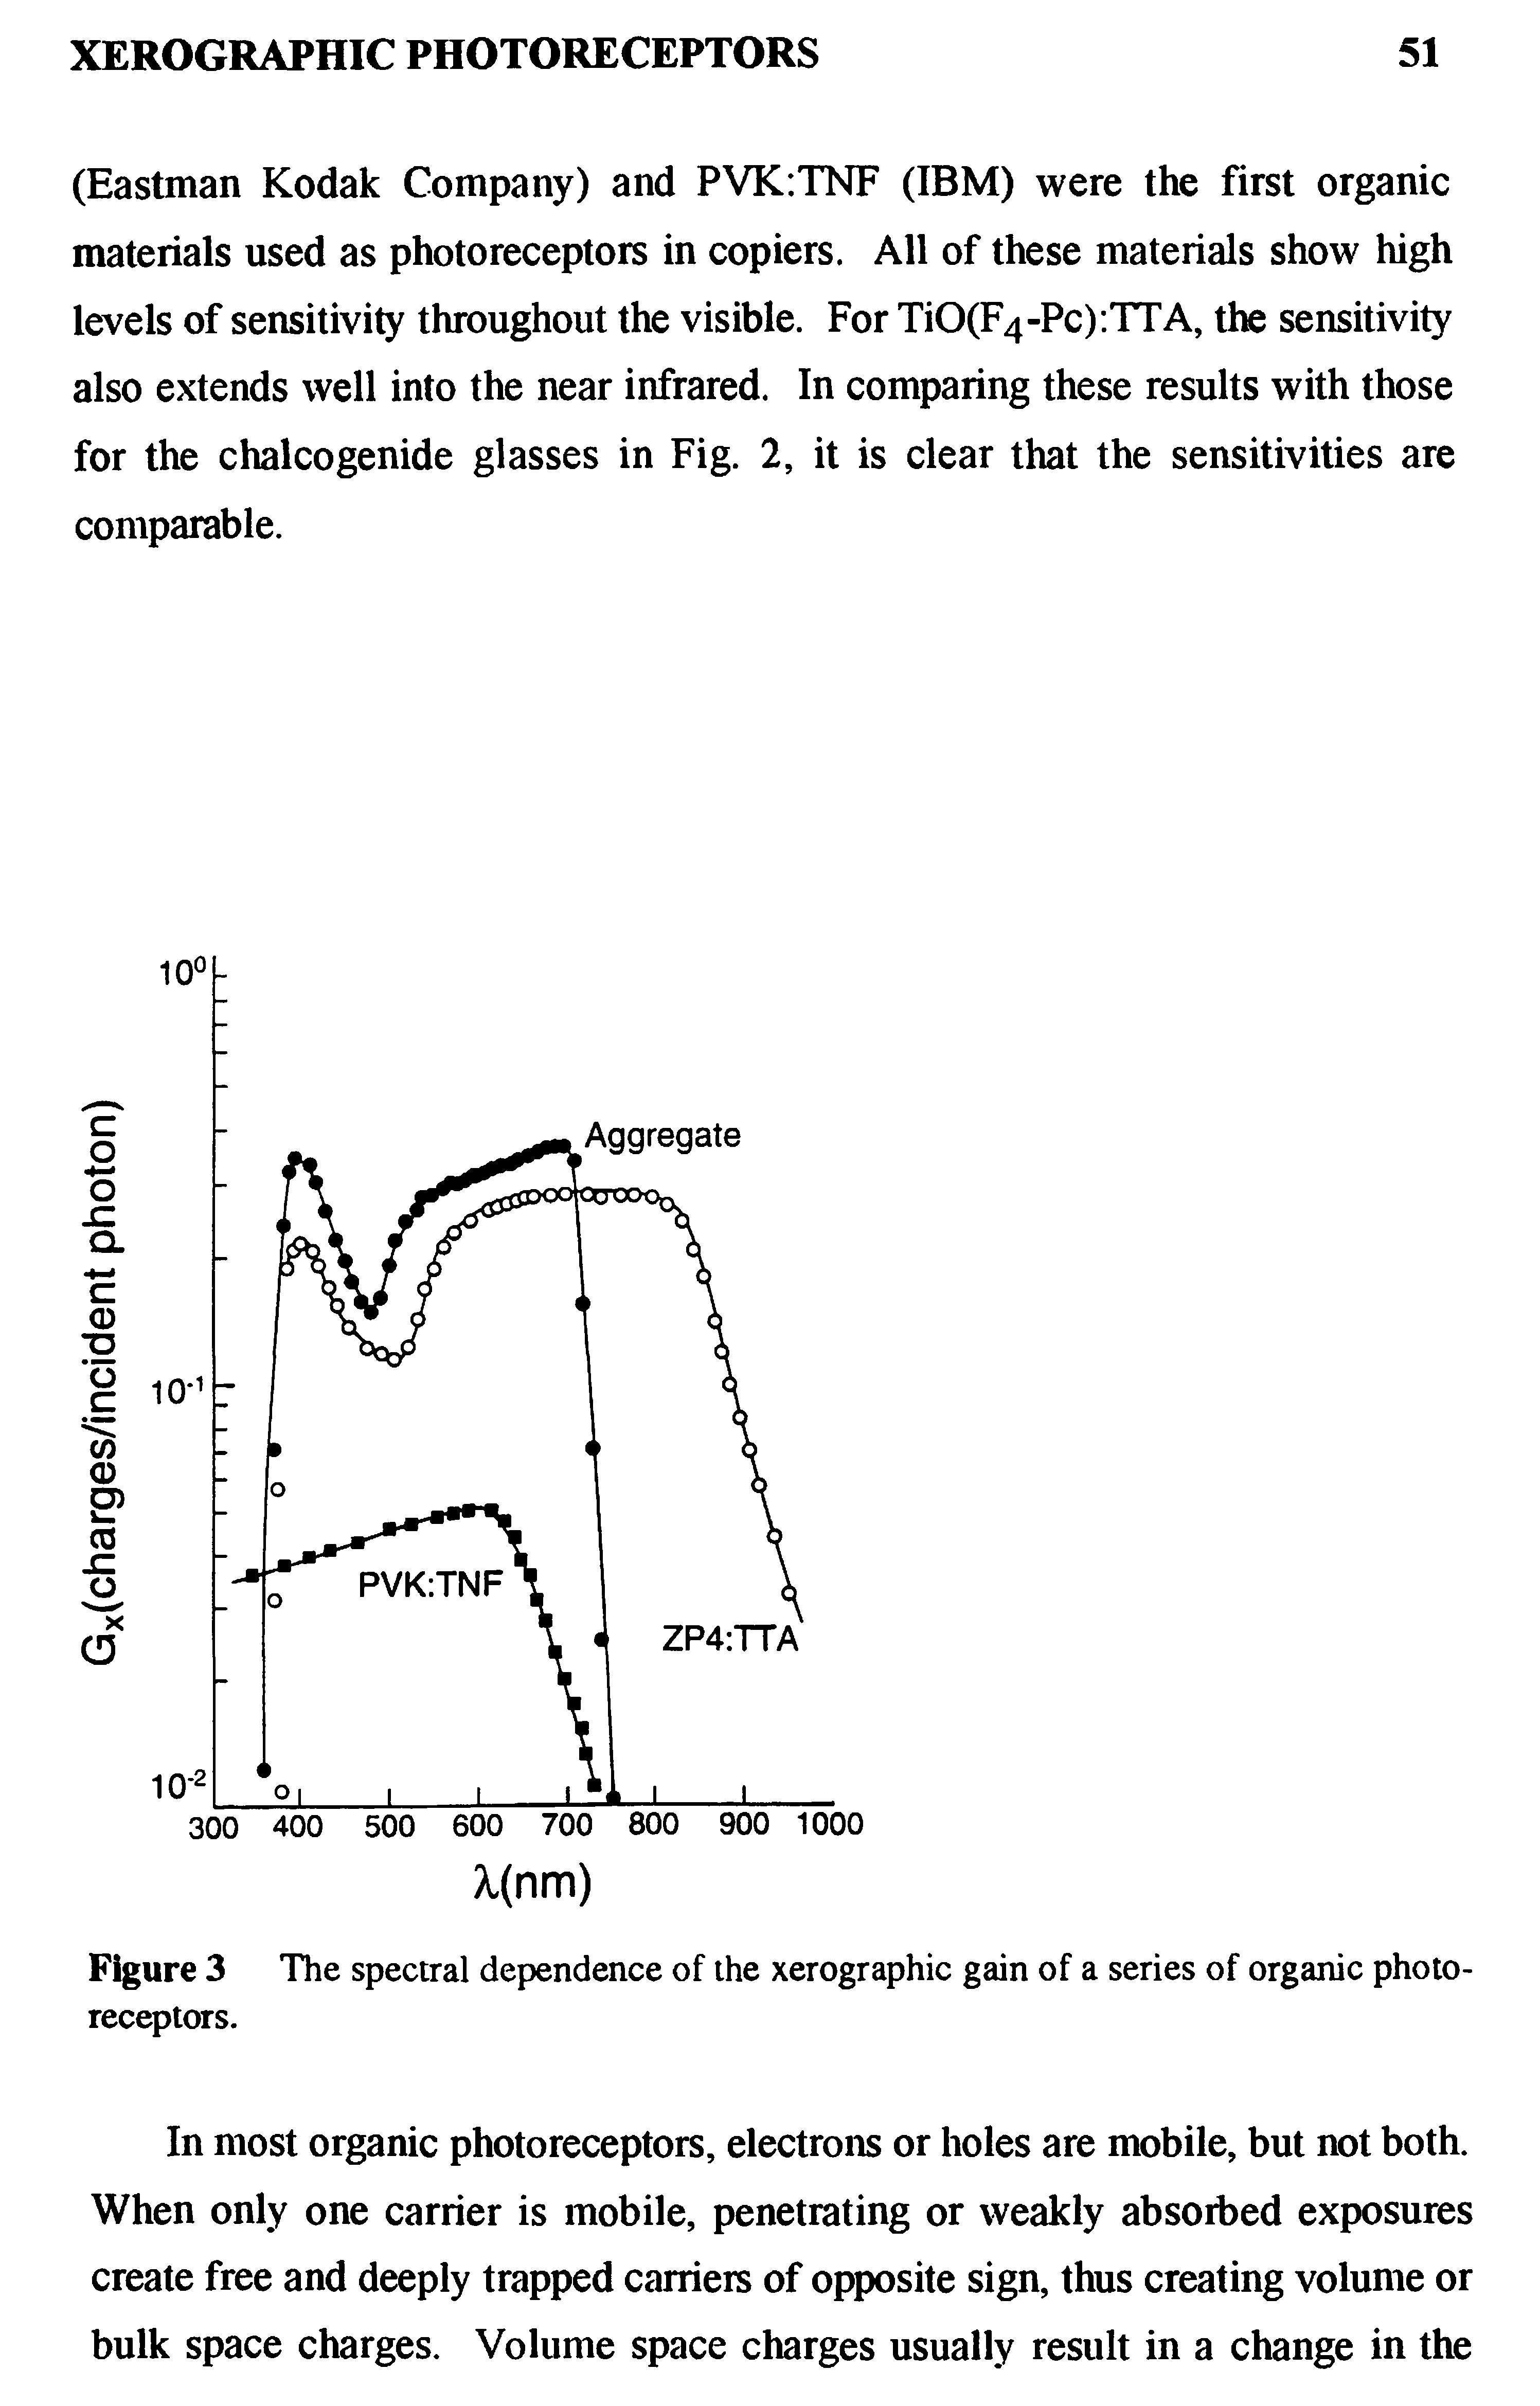 Figure 3 The spectral dependence of the xerographic gain of a series of organic photoreceptors.